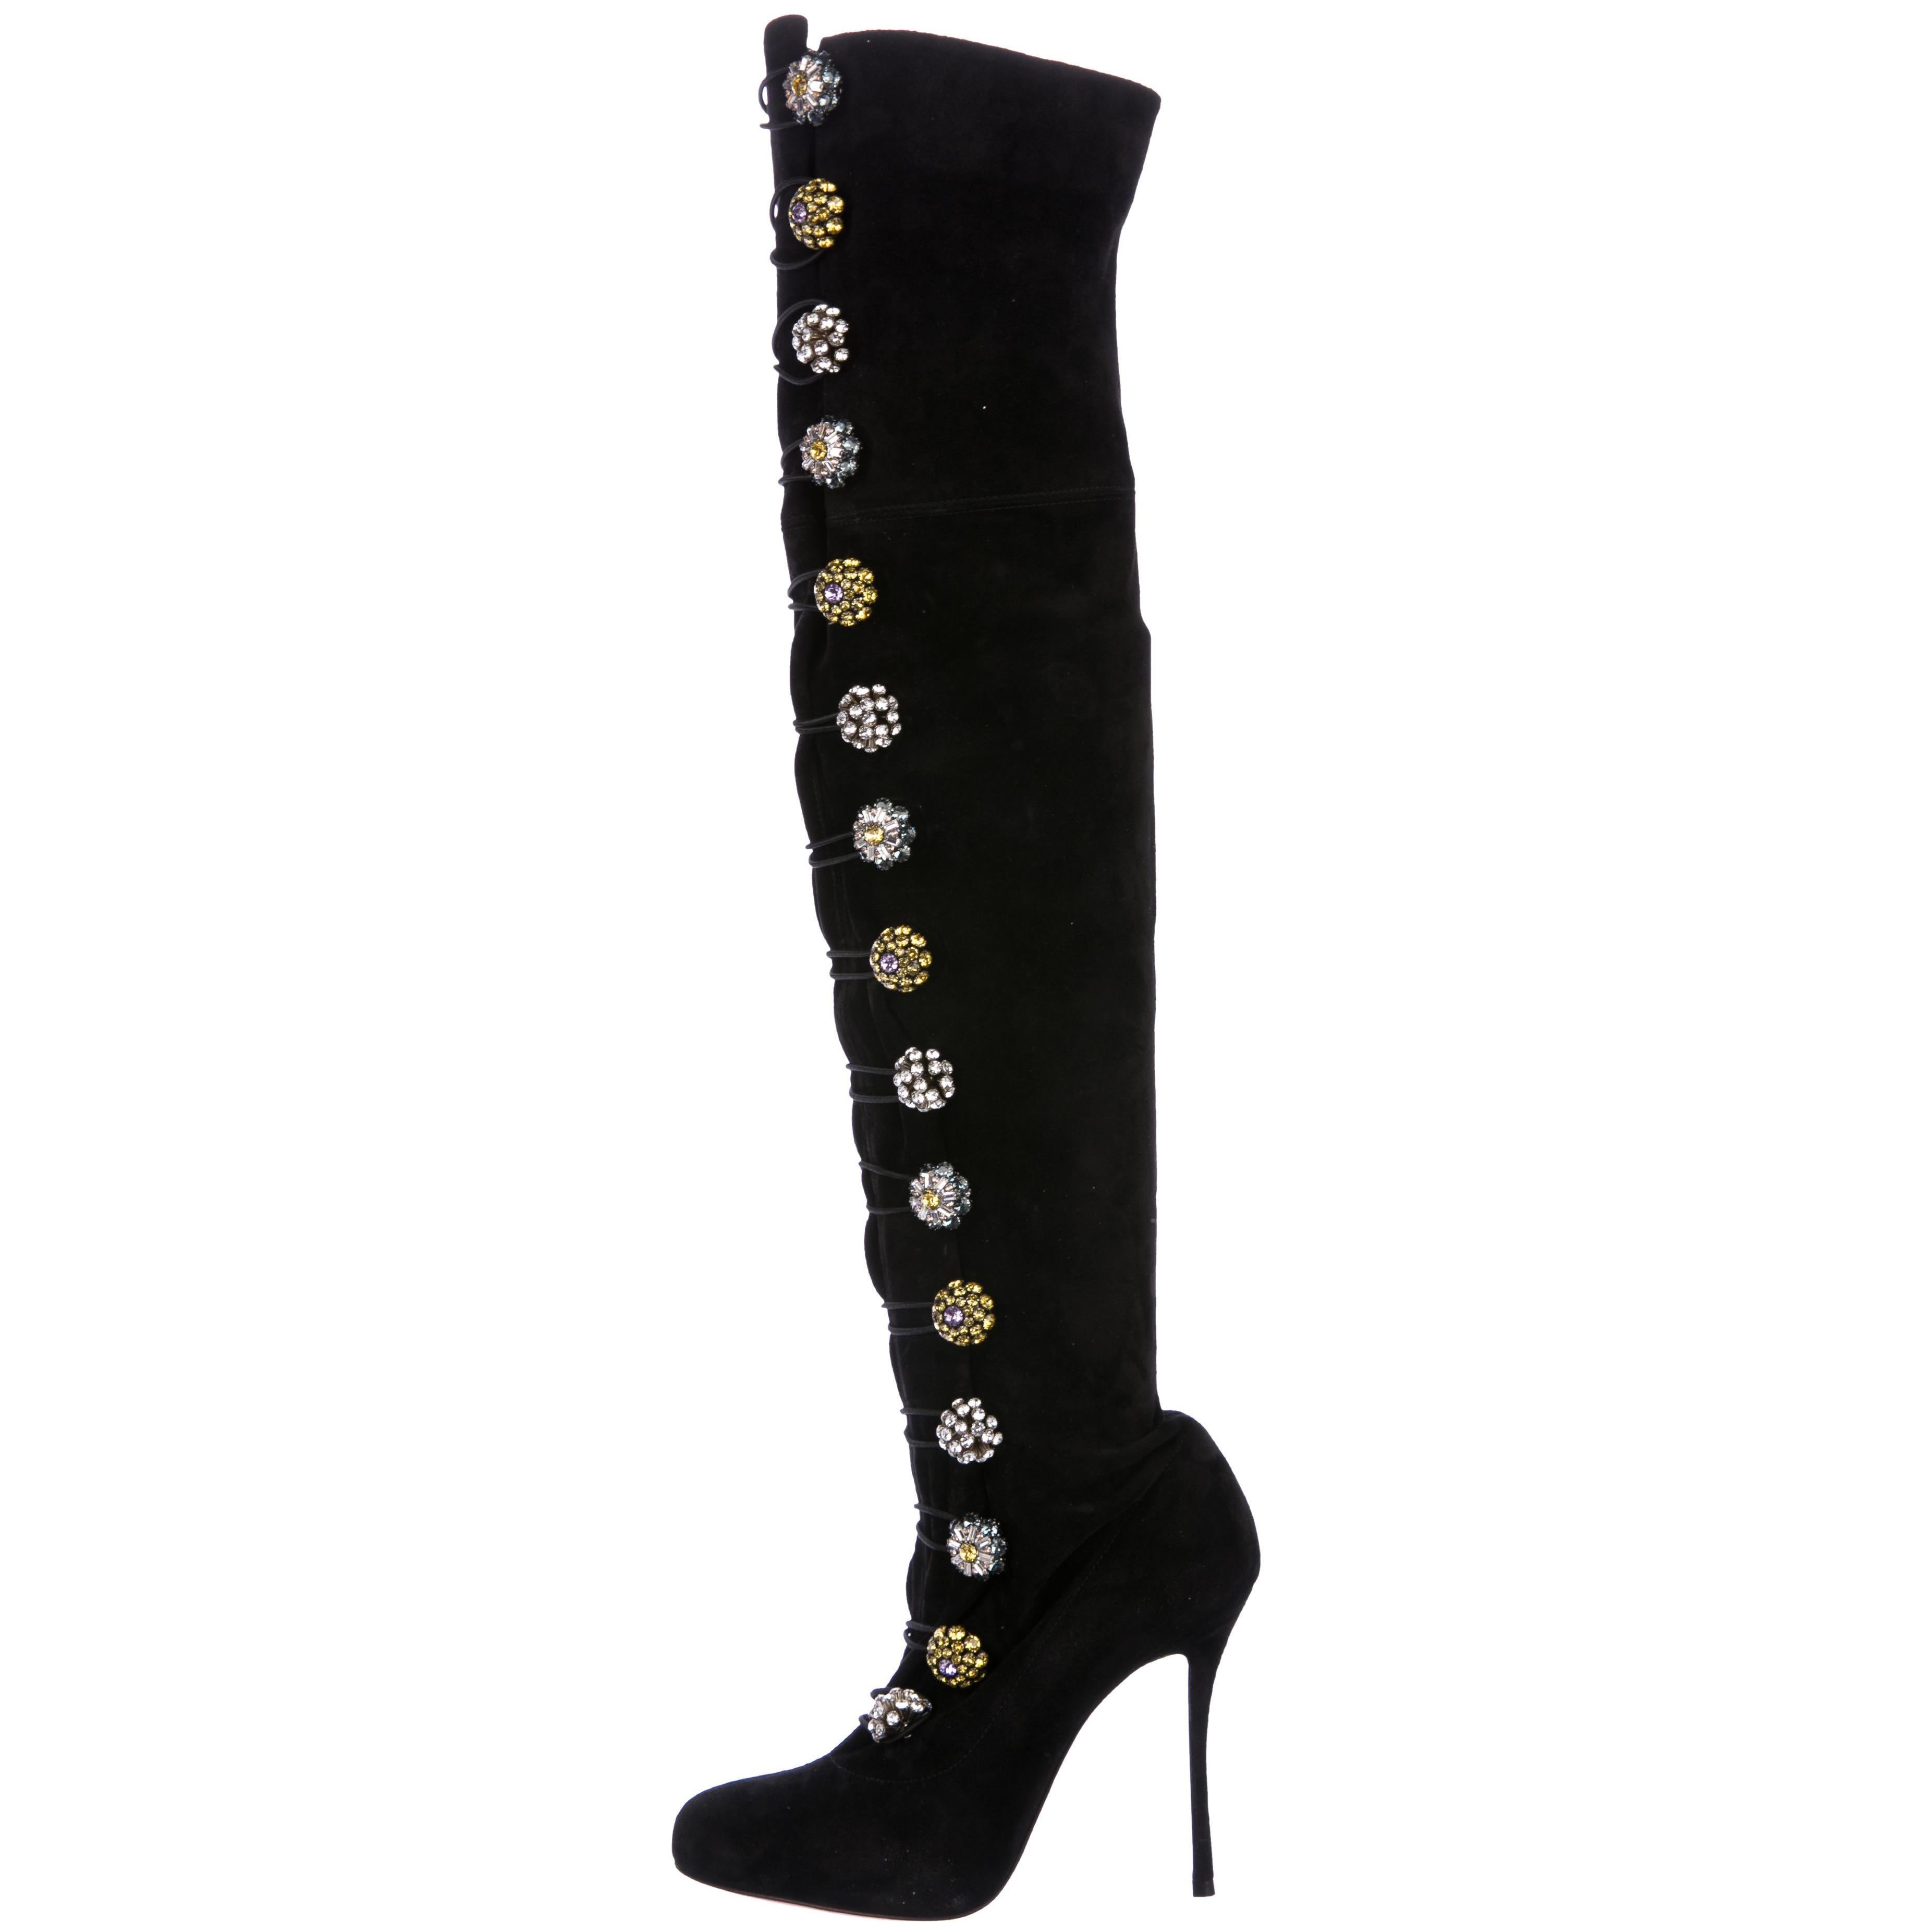 Christian Louboutin NEW Black Suede Flower Buckle Evening Knee High Boots